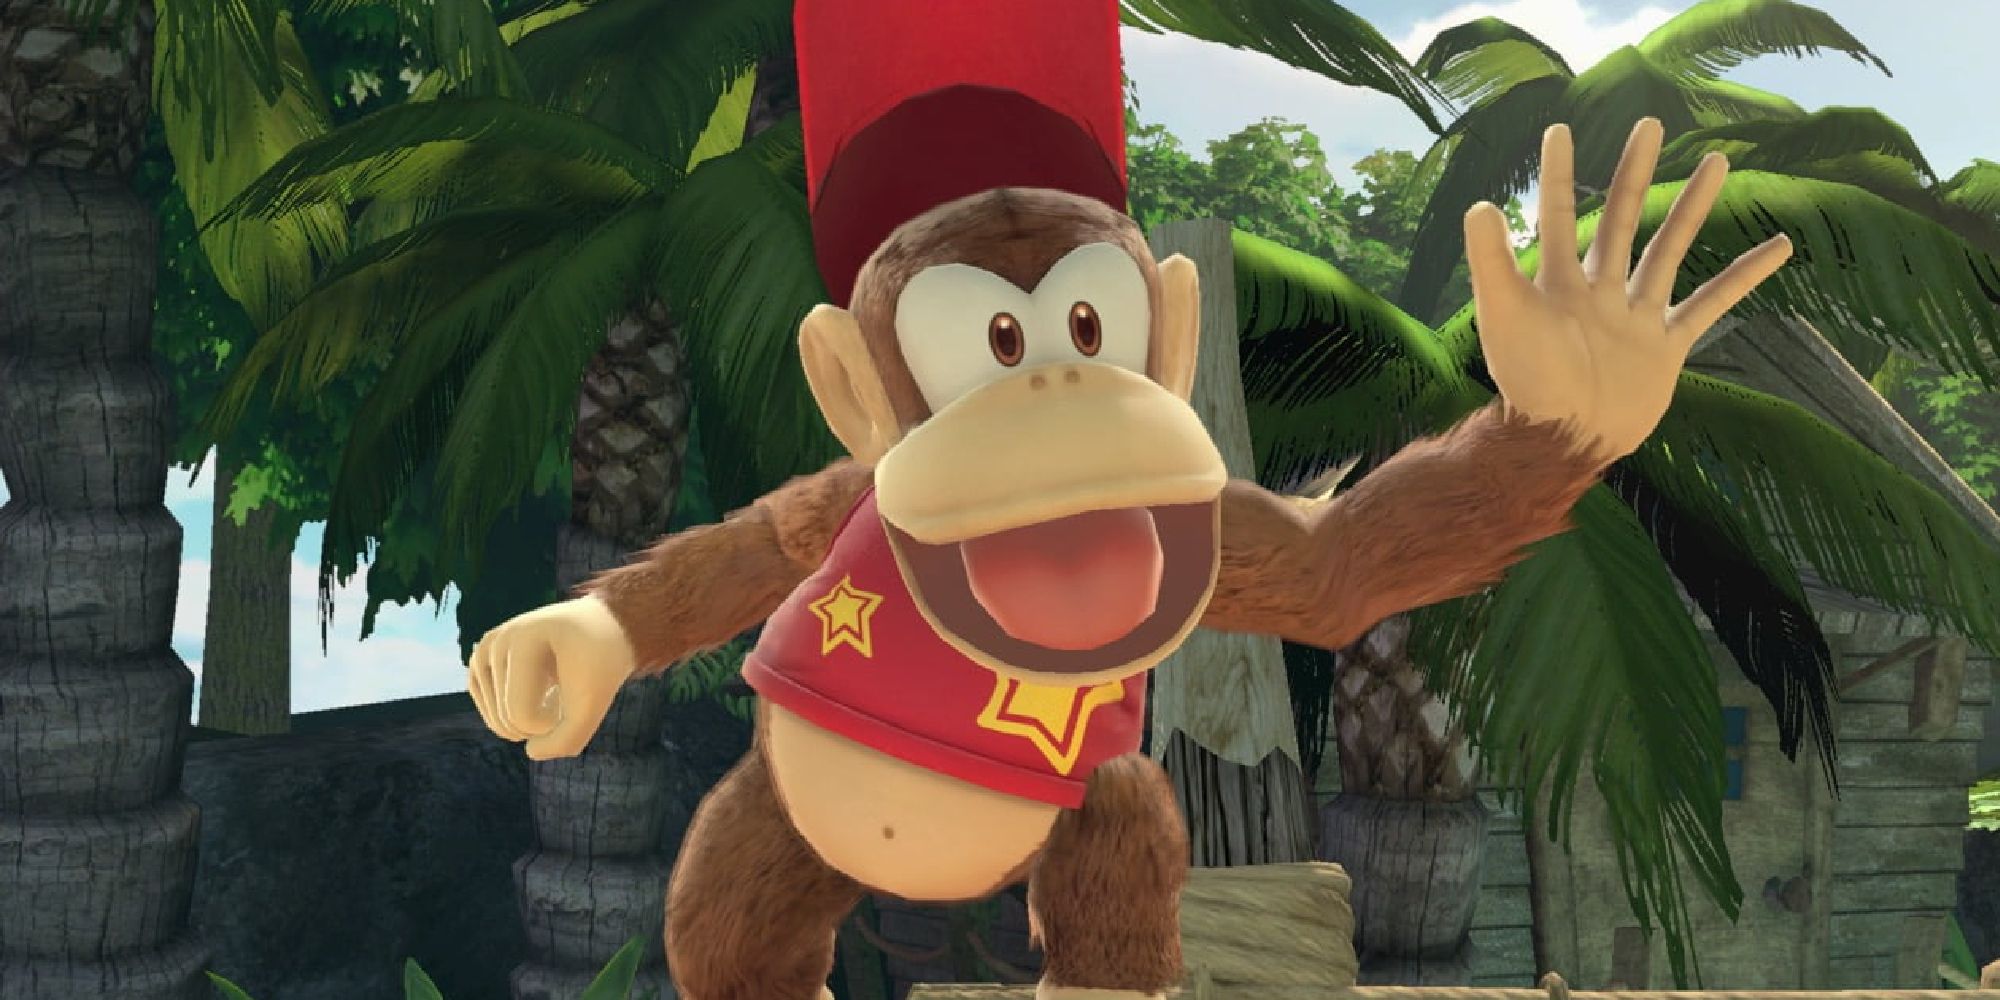 Diddy Kong flipping his hat and waving in Super Smash Bros Ultimate